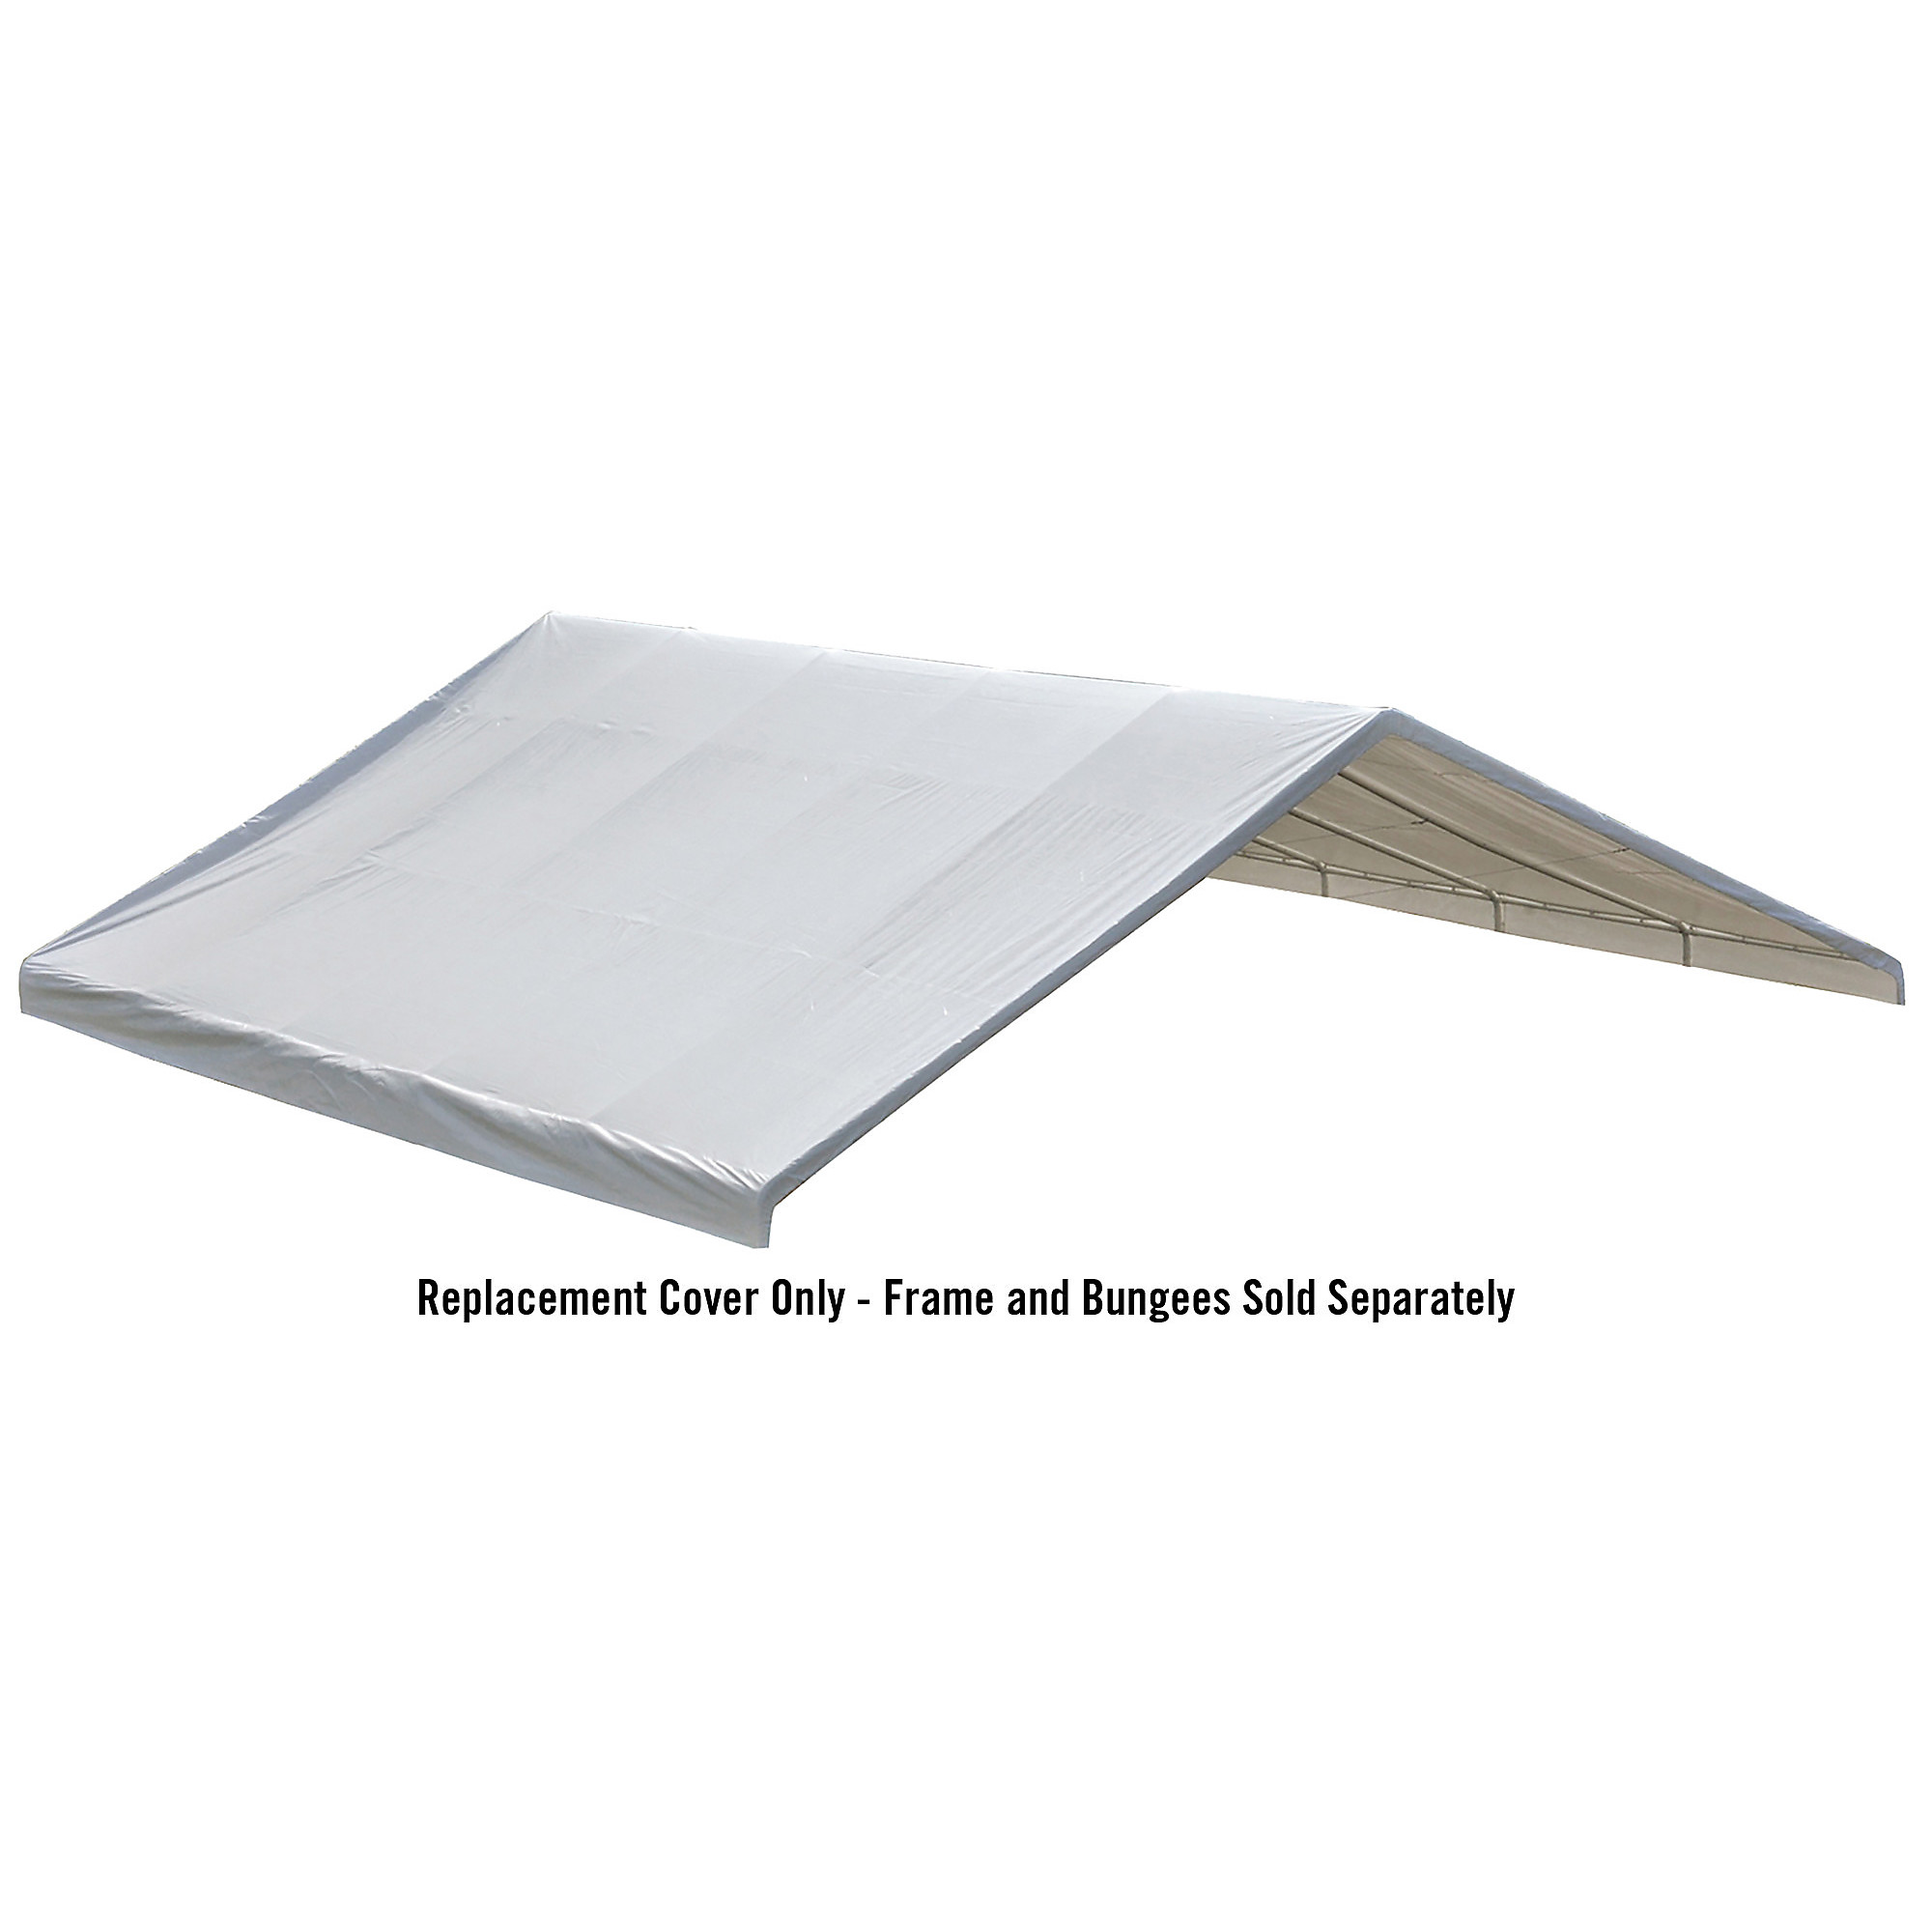 ShelterLogic UltraMax, Replacement Cover - UltraMax Canopy 30 x 30ft., Length 360.39 in, Width 359.86 in, Center Height 158.33 in, Model 27778